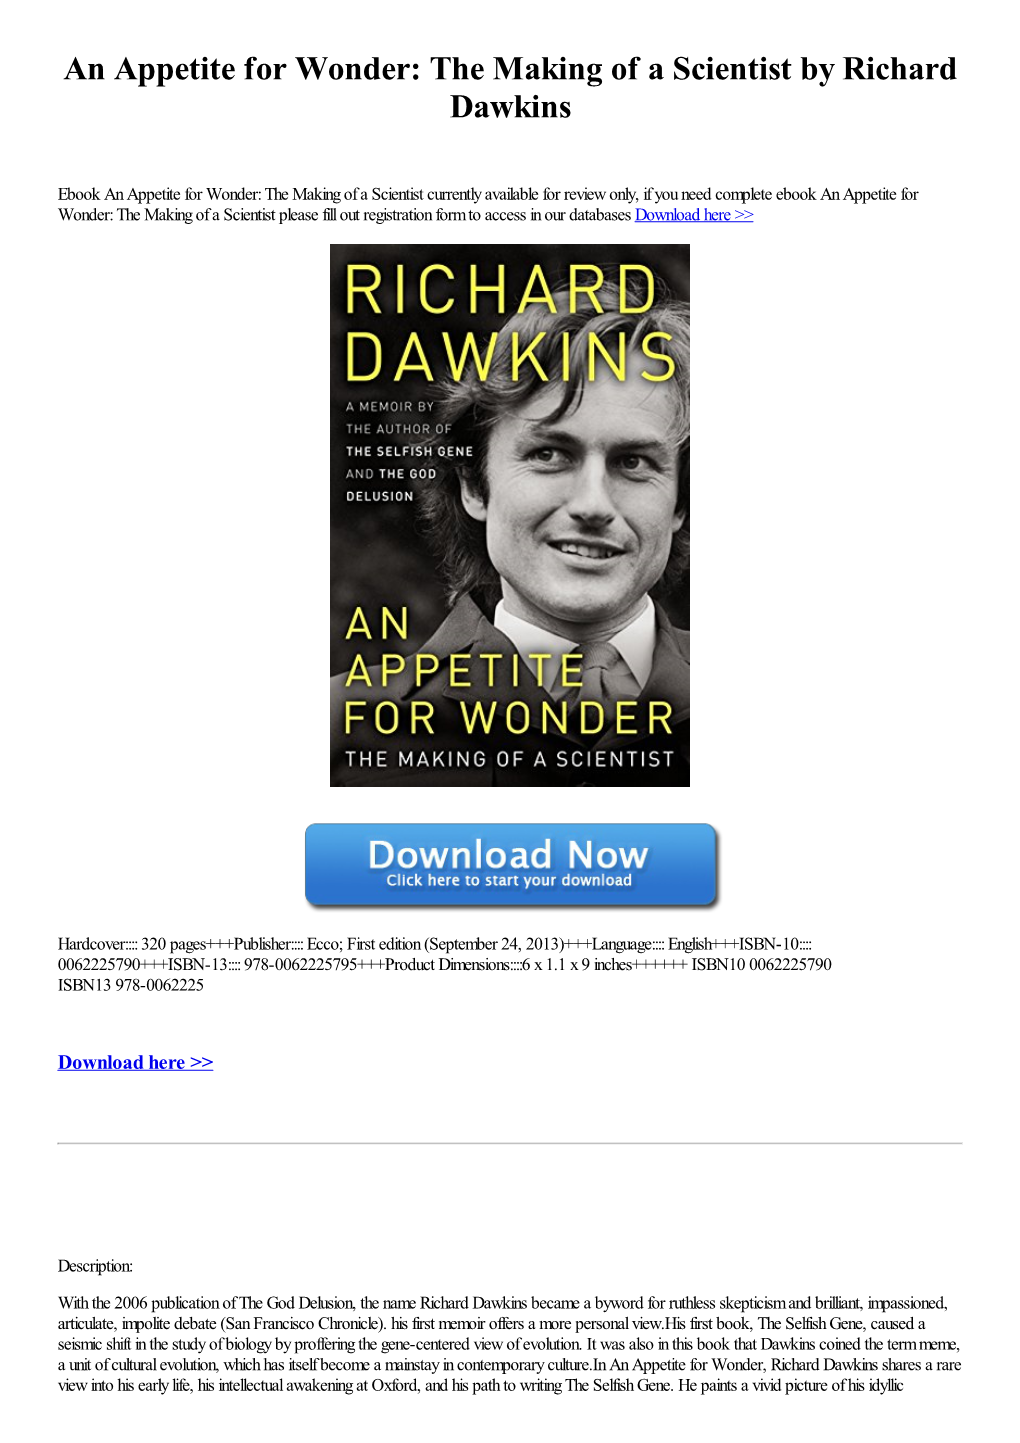 An Appetite for Wonder: the Making of a Scientist by Richard Dawkins